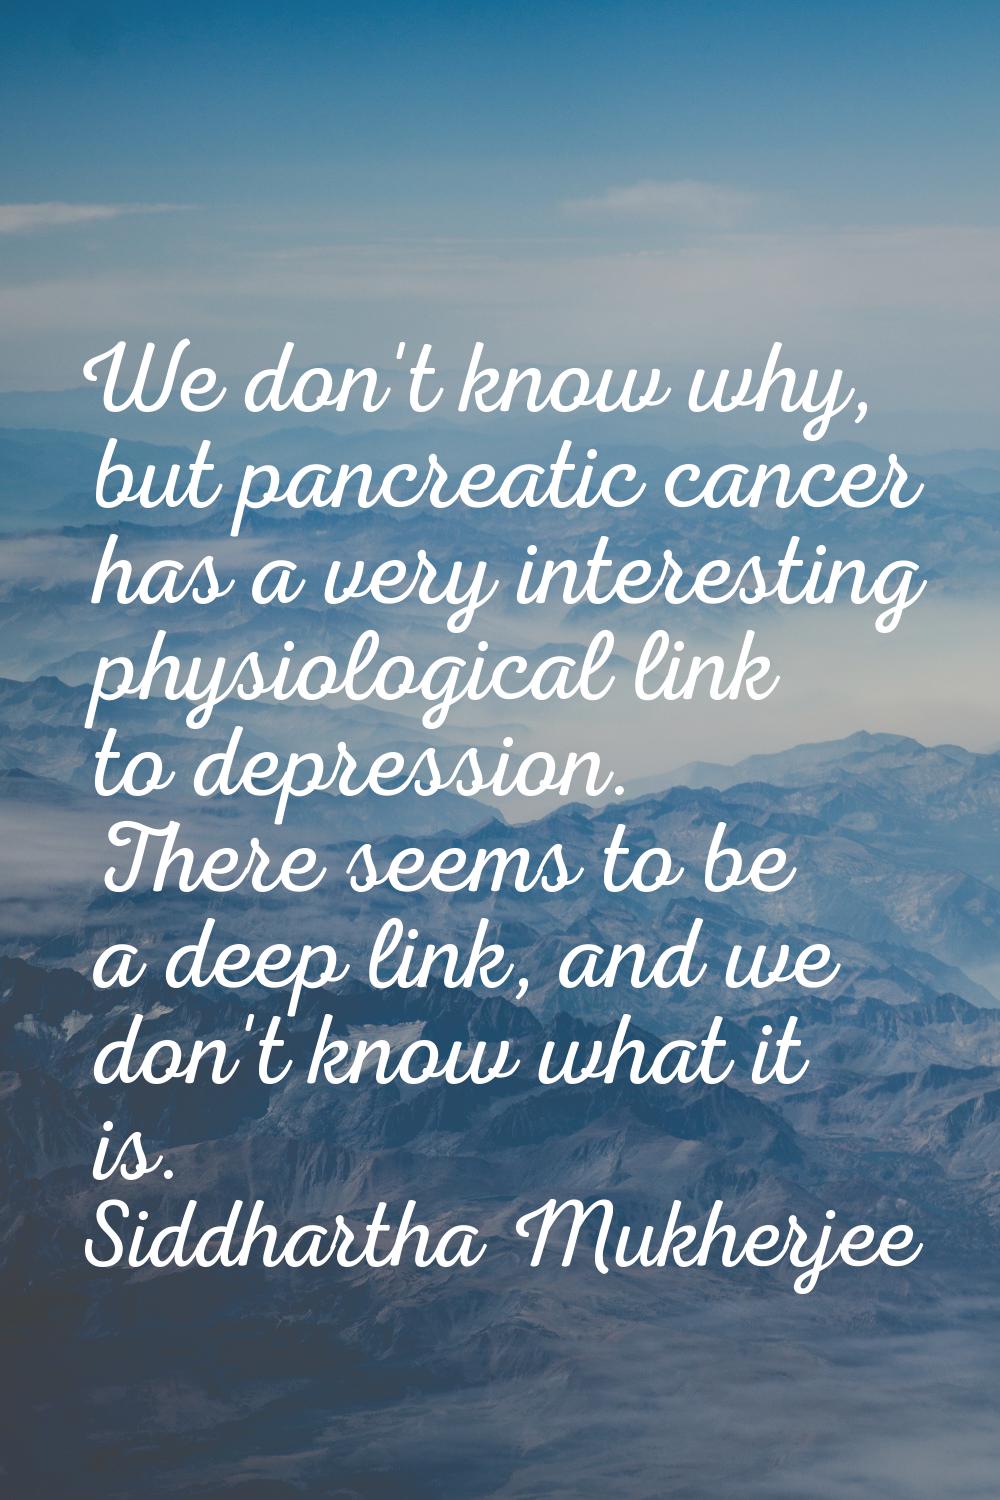 We don't know why, but pancreatic cancer has a very interesting physiological link to depression. T